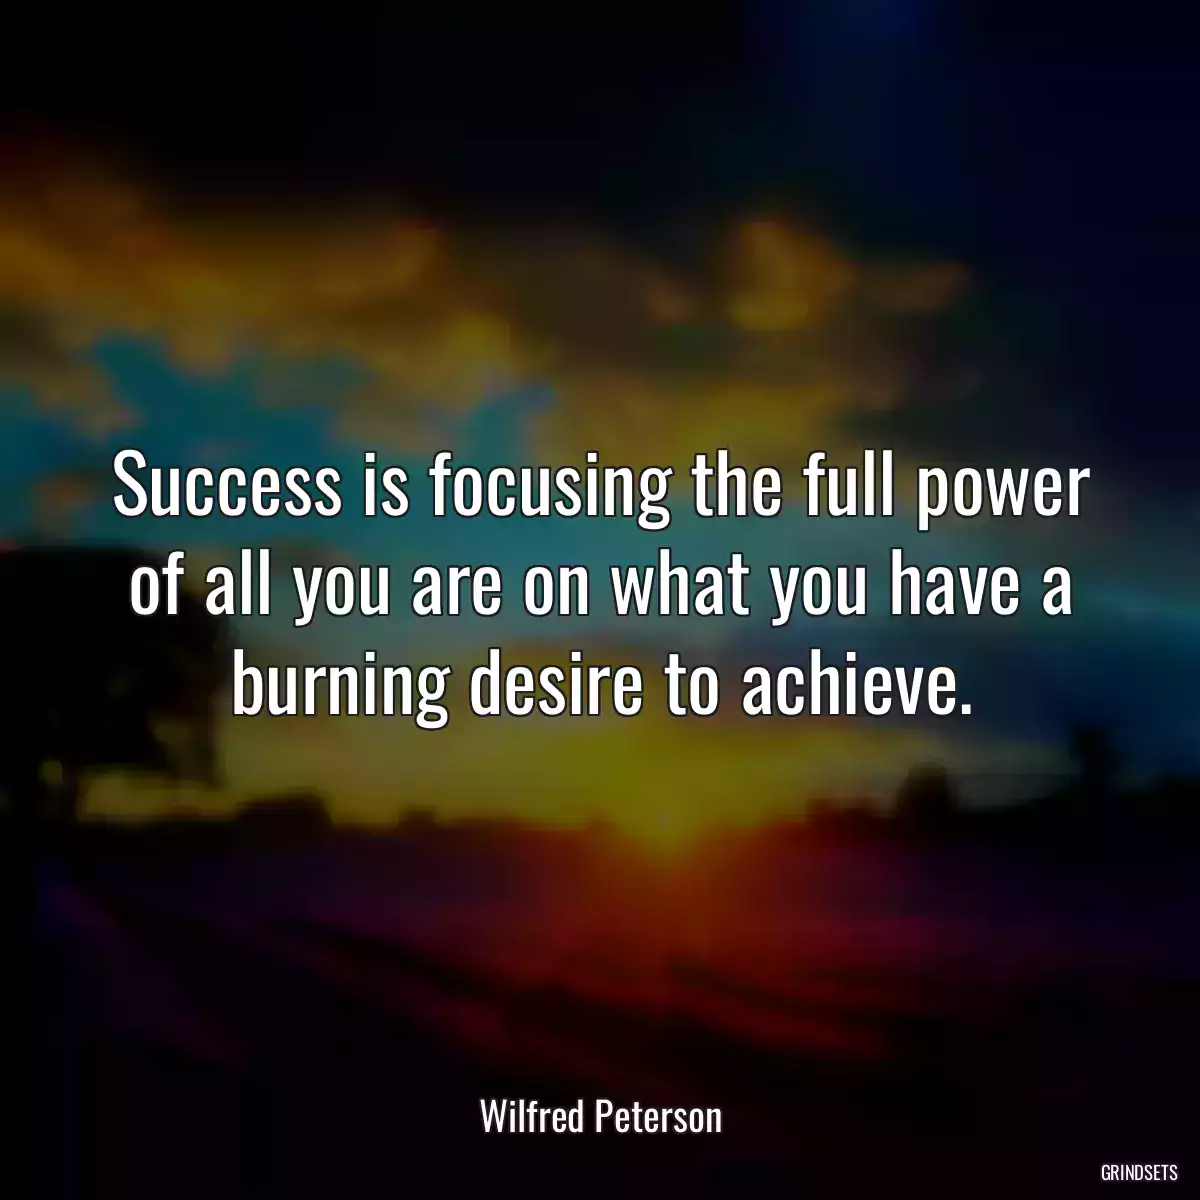 Success is focusing the full power of all you are on what you have a burning desire to achieve.